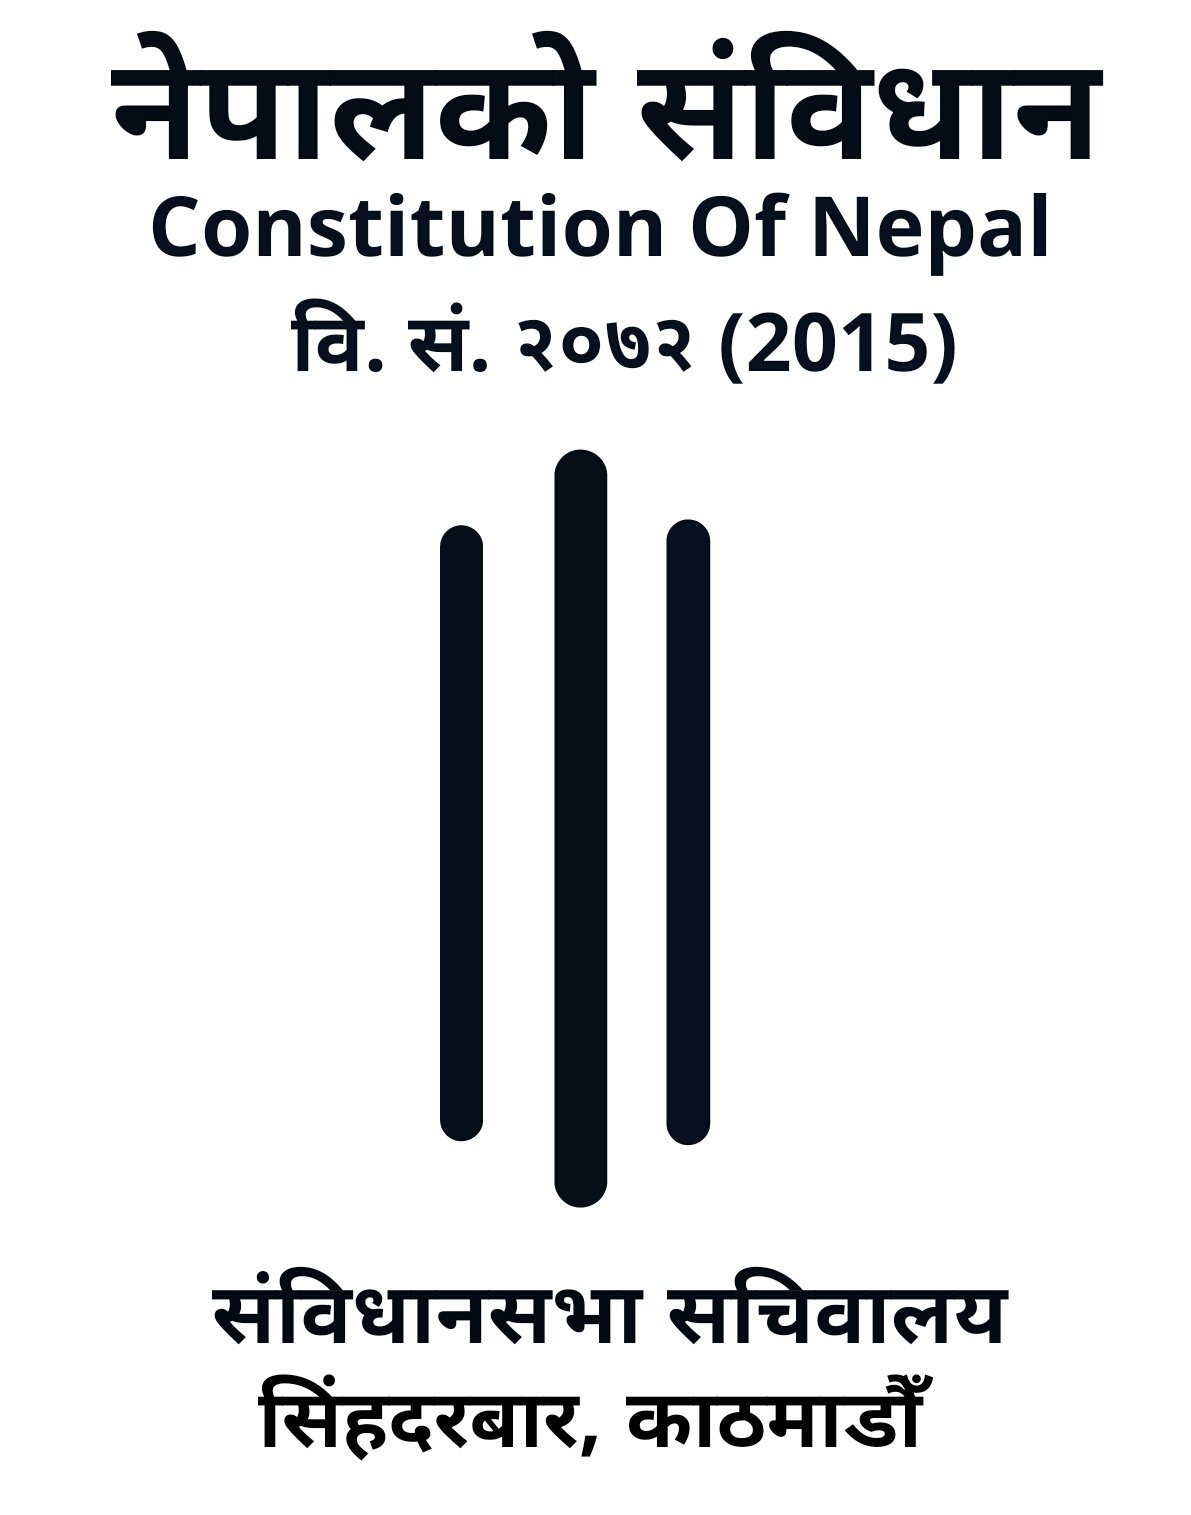 Constitution Day: Why Constitution of 2015 is so special compared to previous constitutions